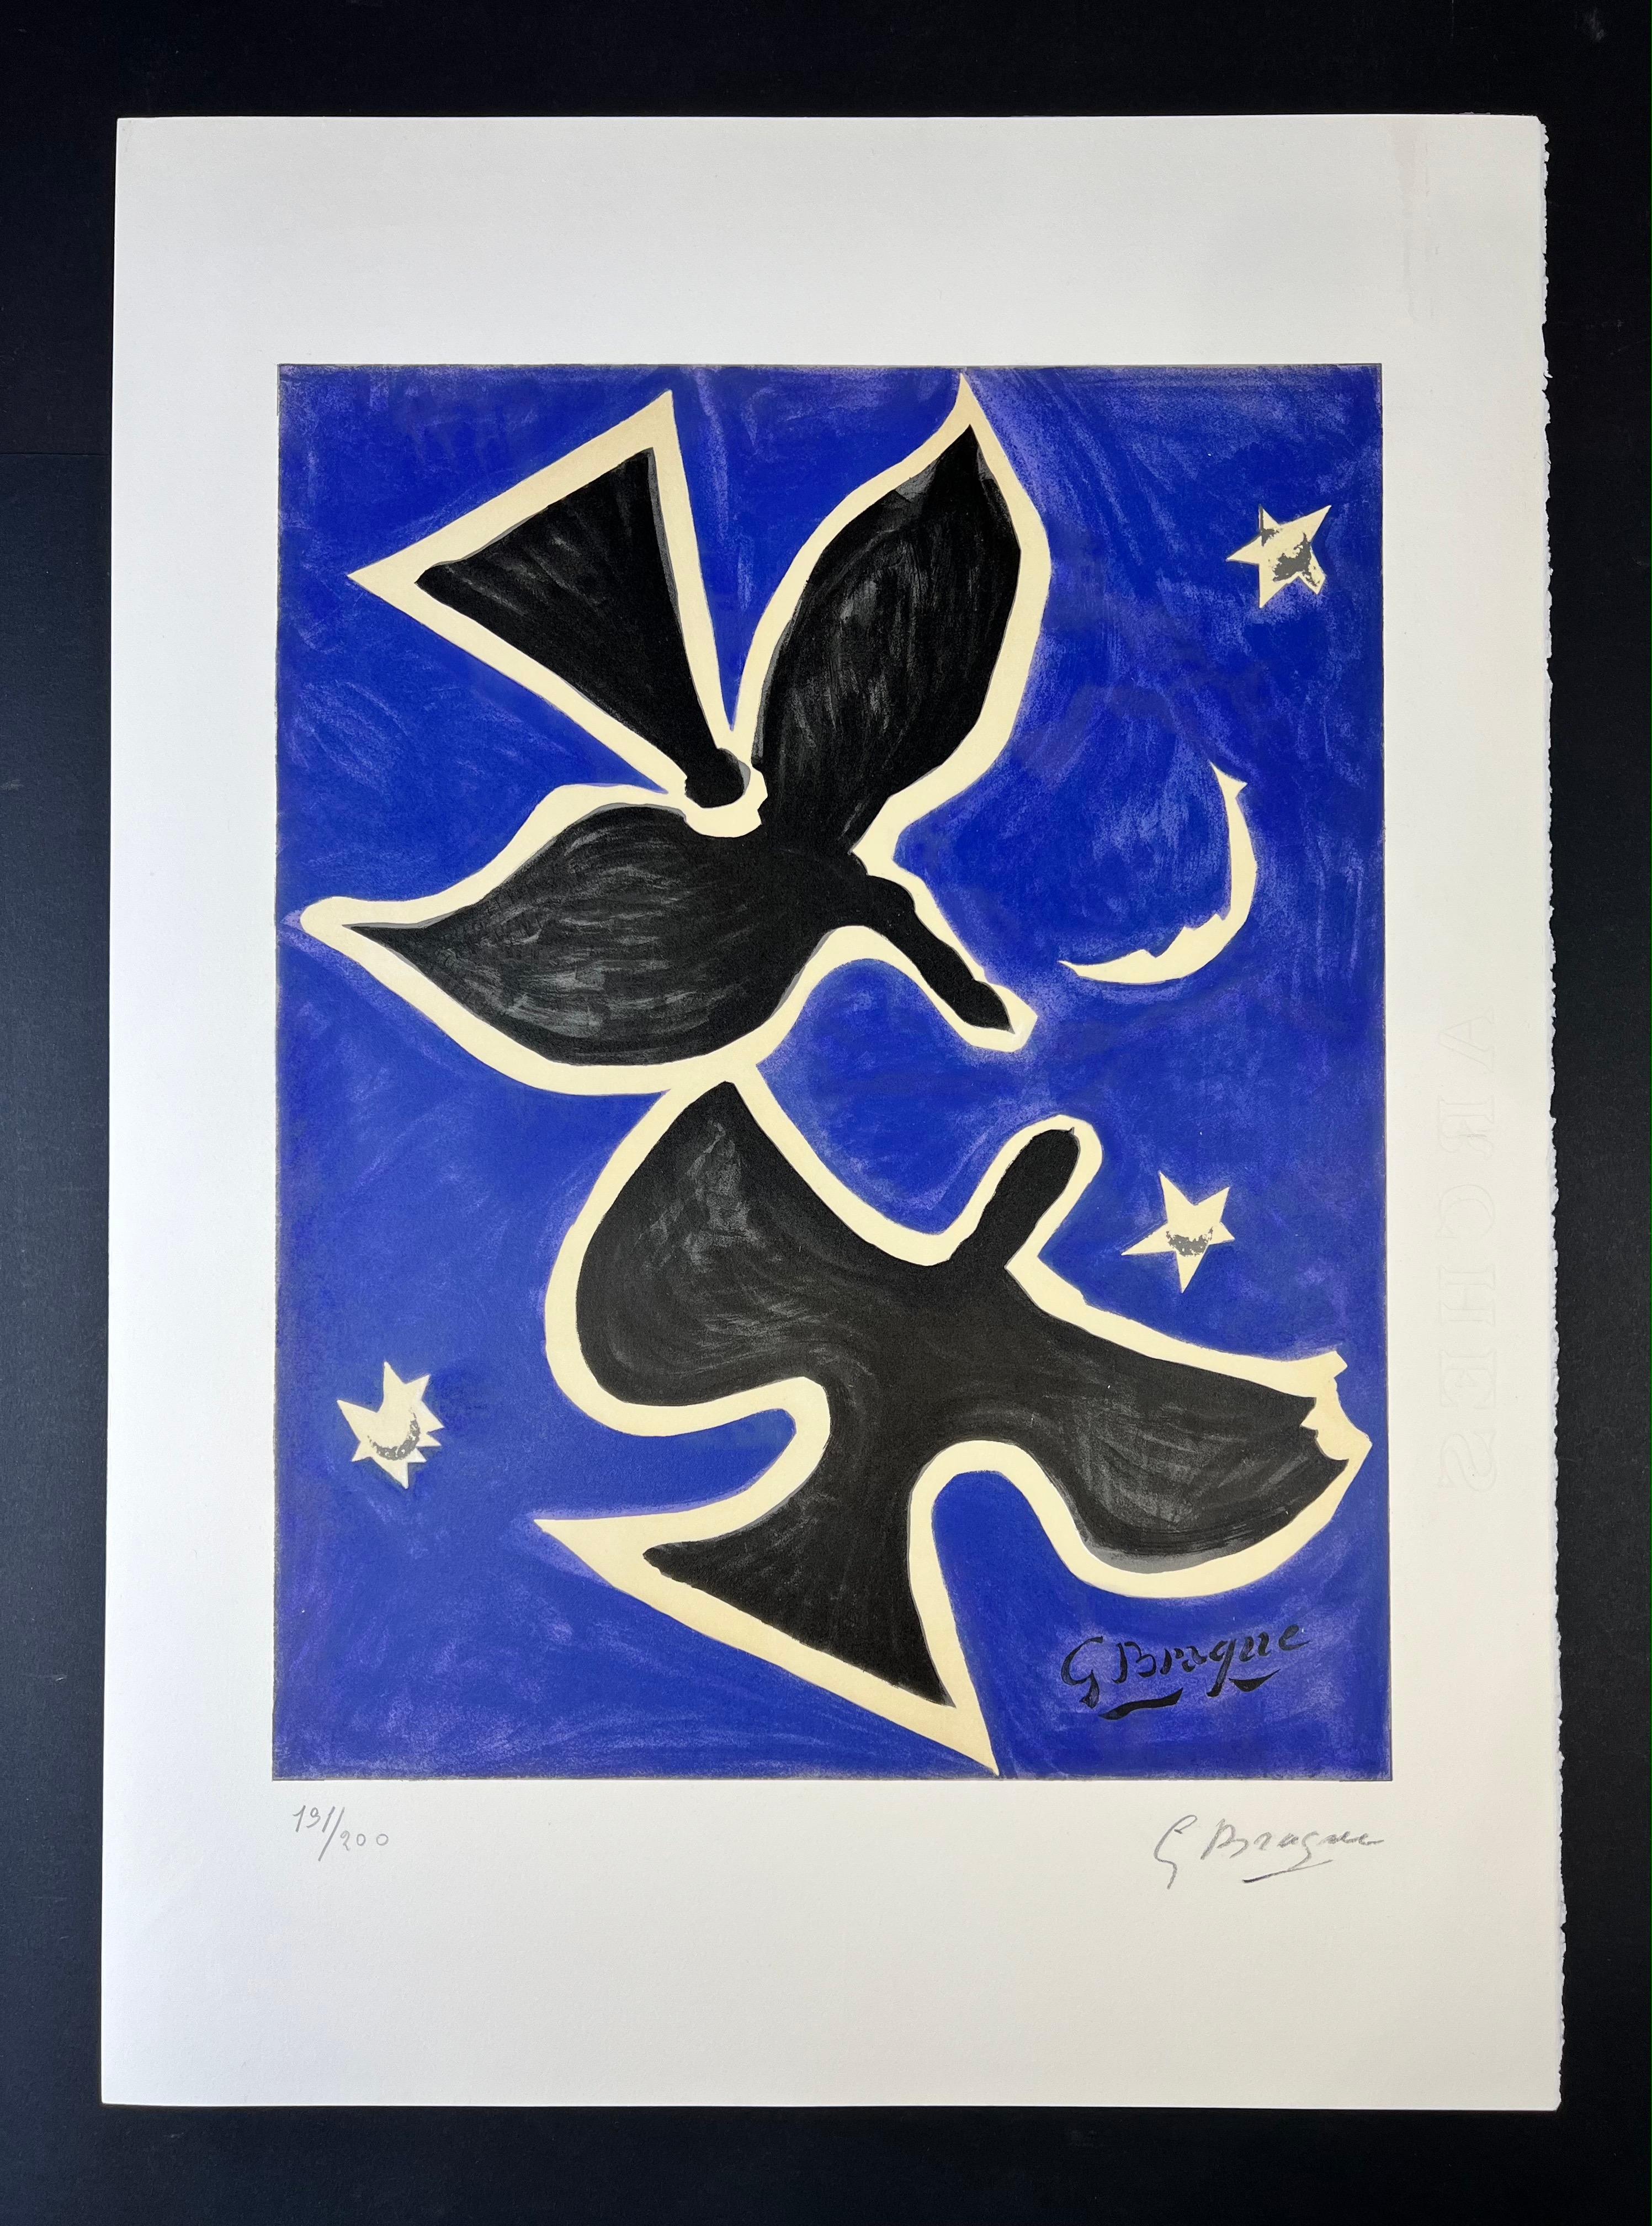 Georges Braque ( 1882 – 1963 ) – Deux Oiseaux – hand-signed lithograph on Arches - Print by George Braque